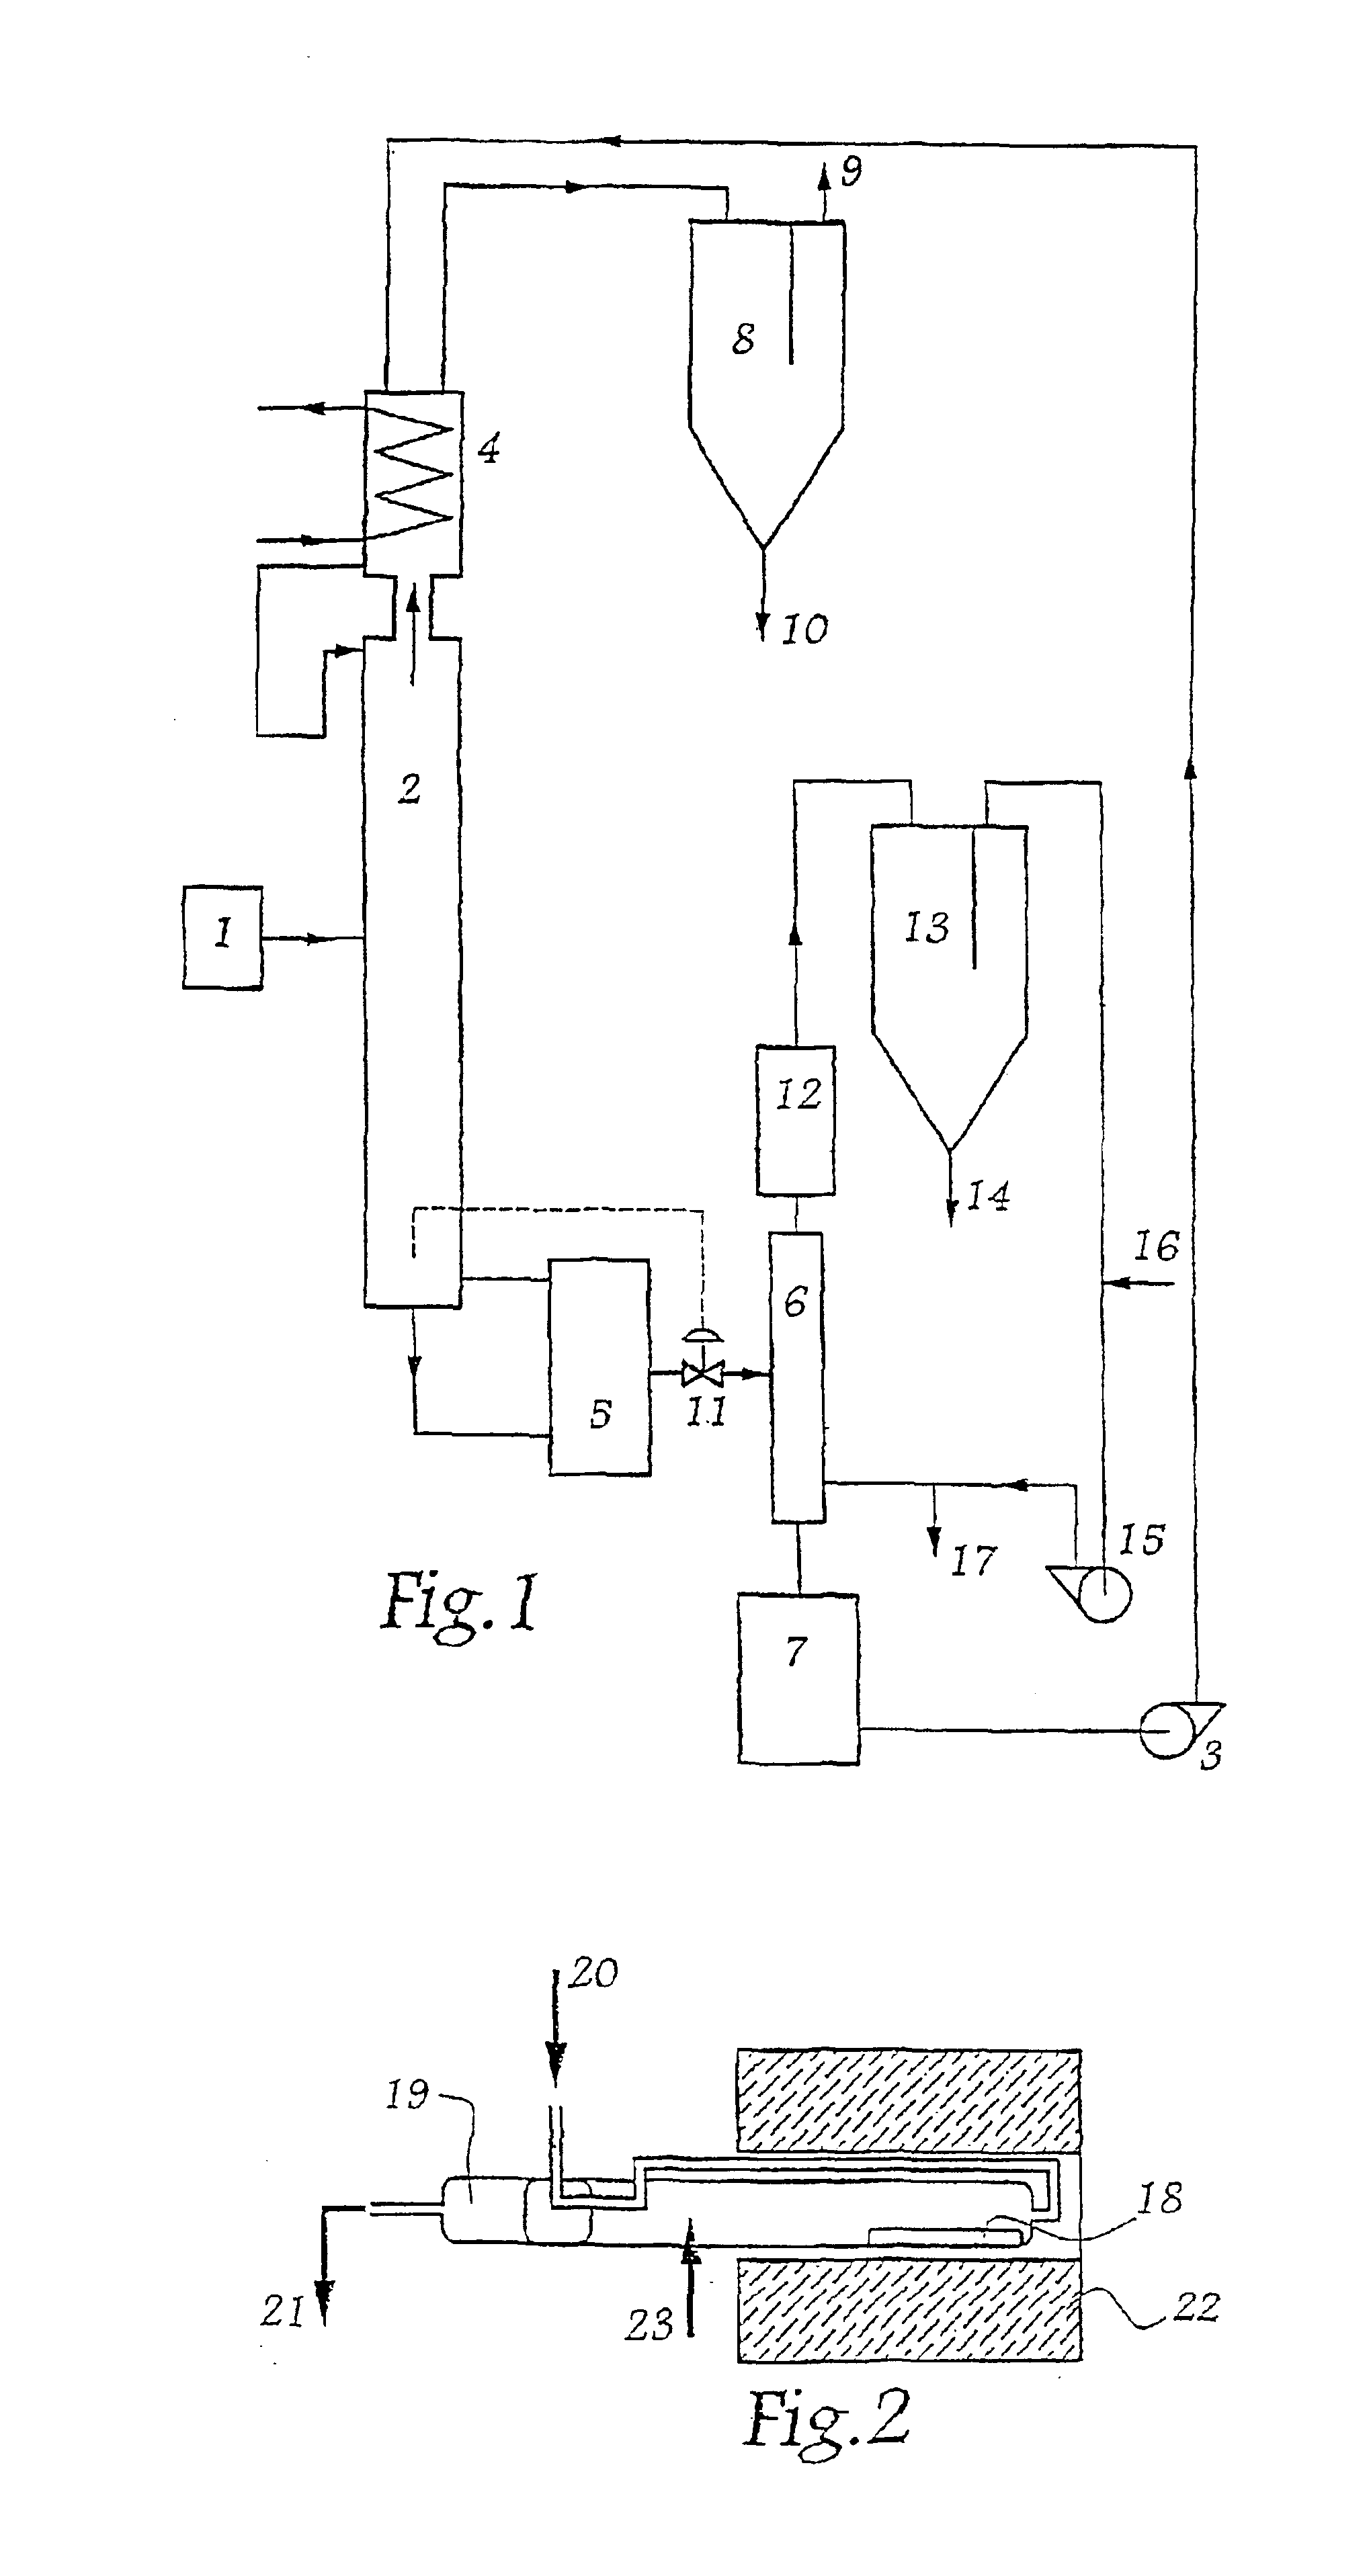 Method for separating zirconium and hafnium tetrachlorides with the aid of a melted solvent